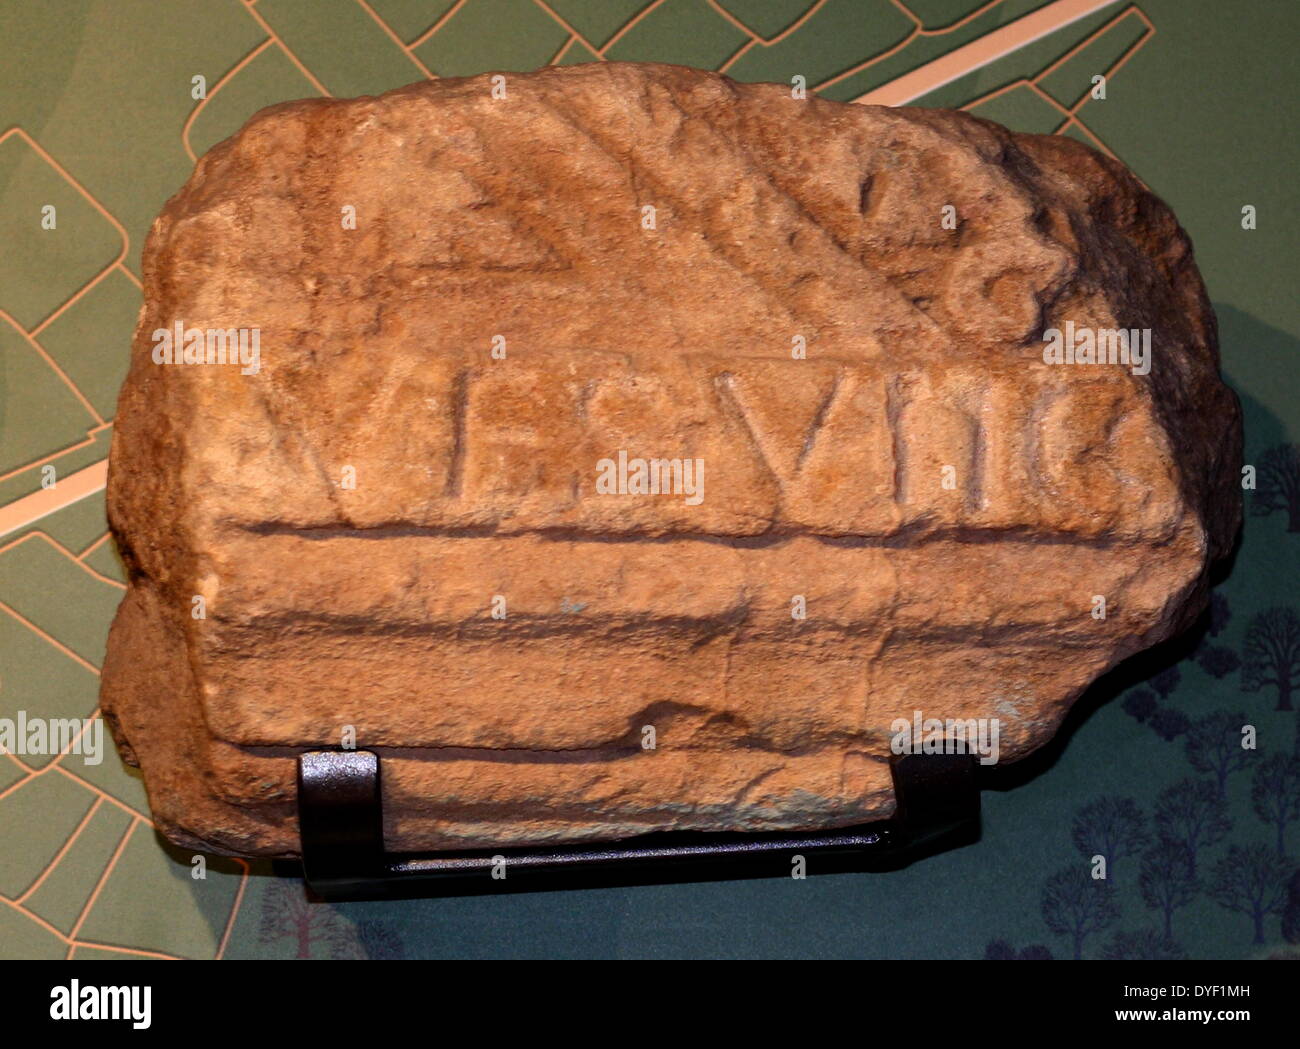 A wall fragment featuring inscription from the Roman baths. The oldest inscription found, it reads 'In the 7th consulship of the emperor Vespasian'. This helps date this part of the baths at seven years after he became Emperor in 69 AD. Stock Photo